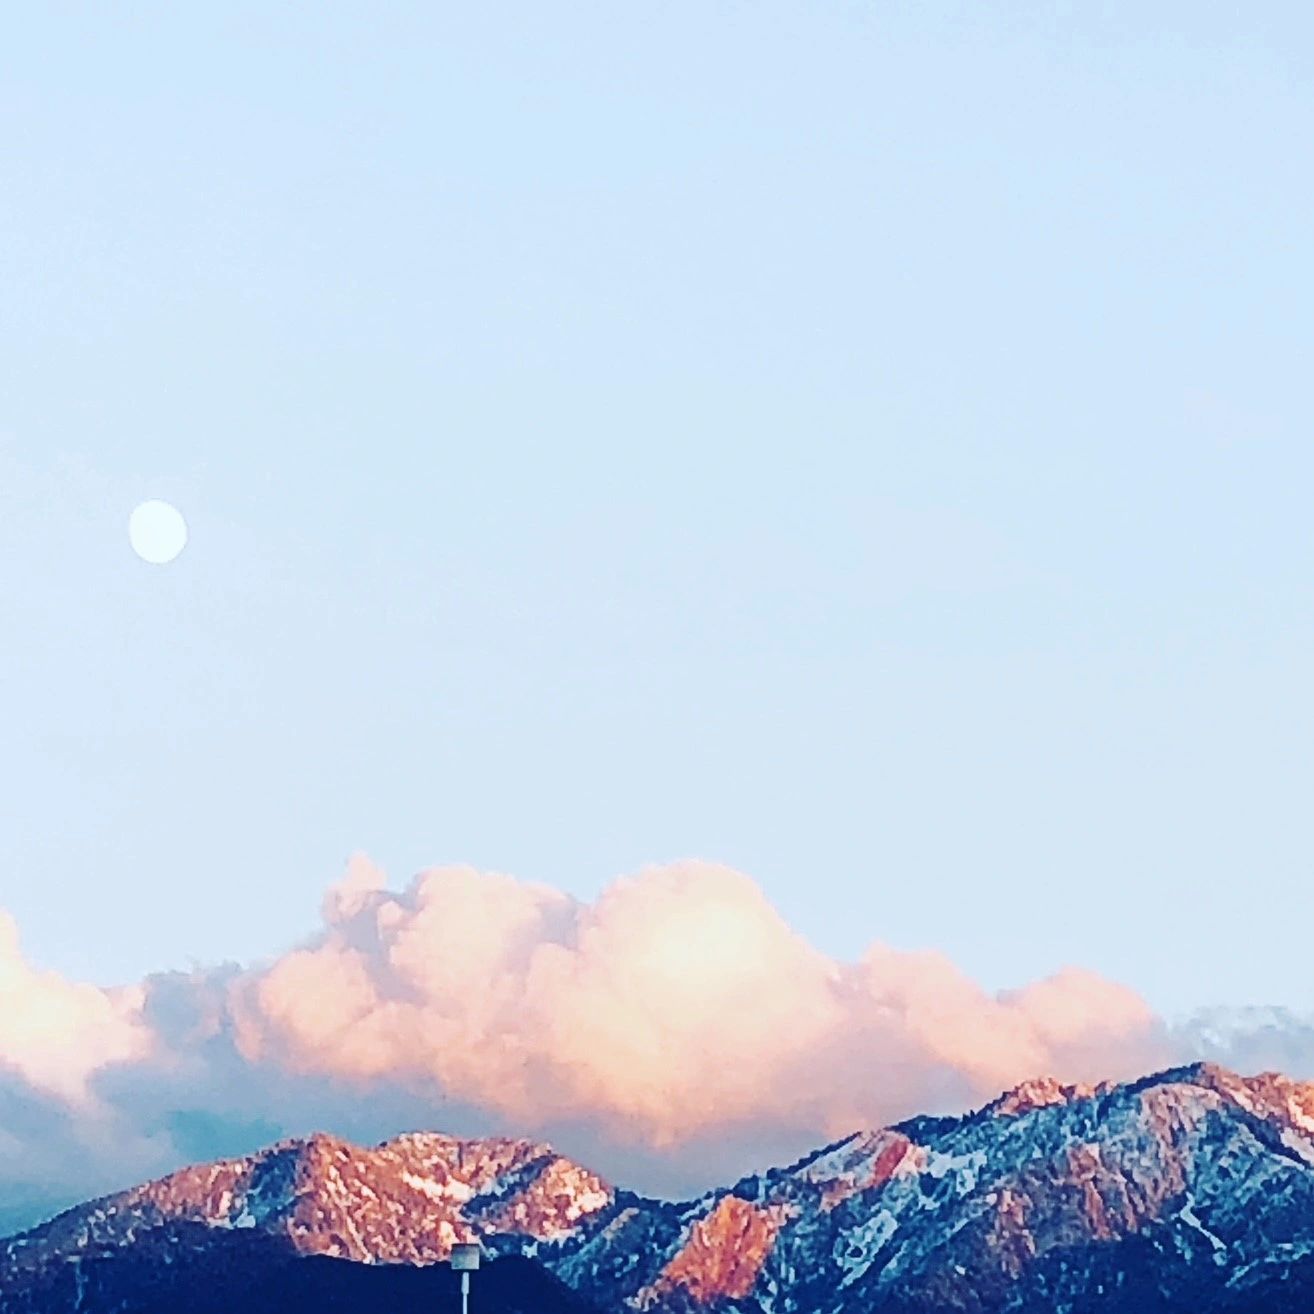 Photo credit: Elizabeth Bellit, full moon rising over the Wasatch